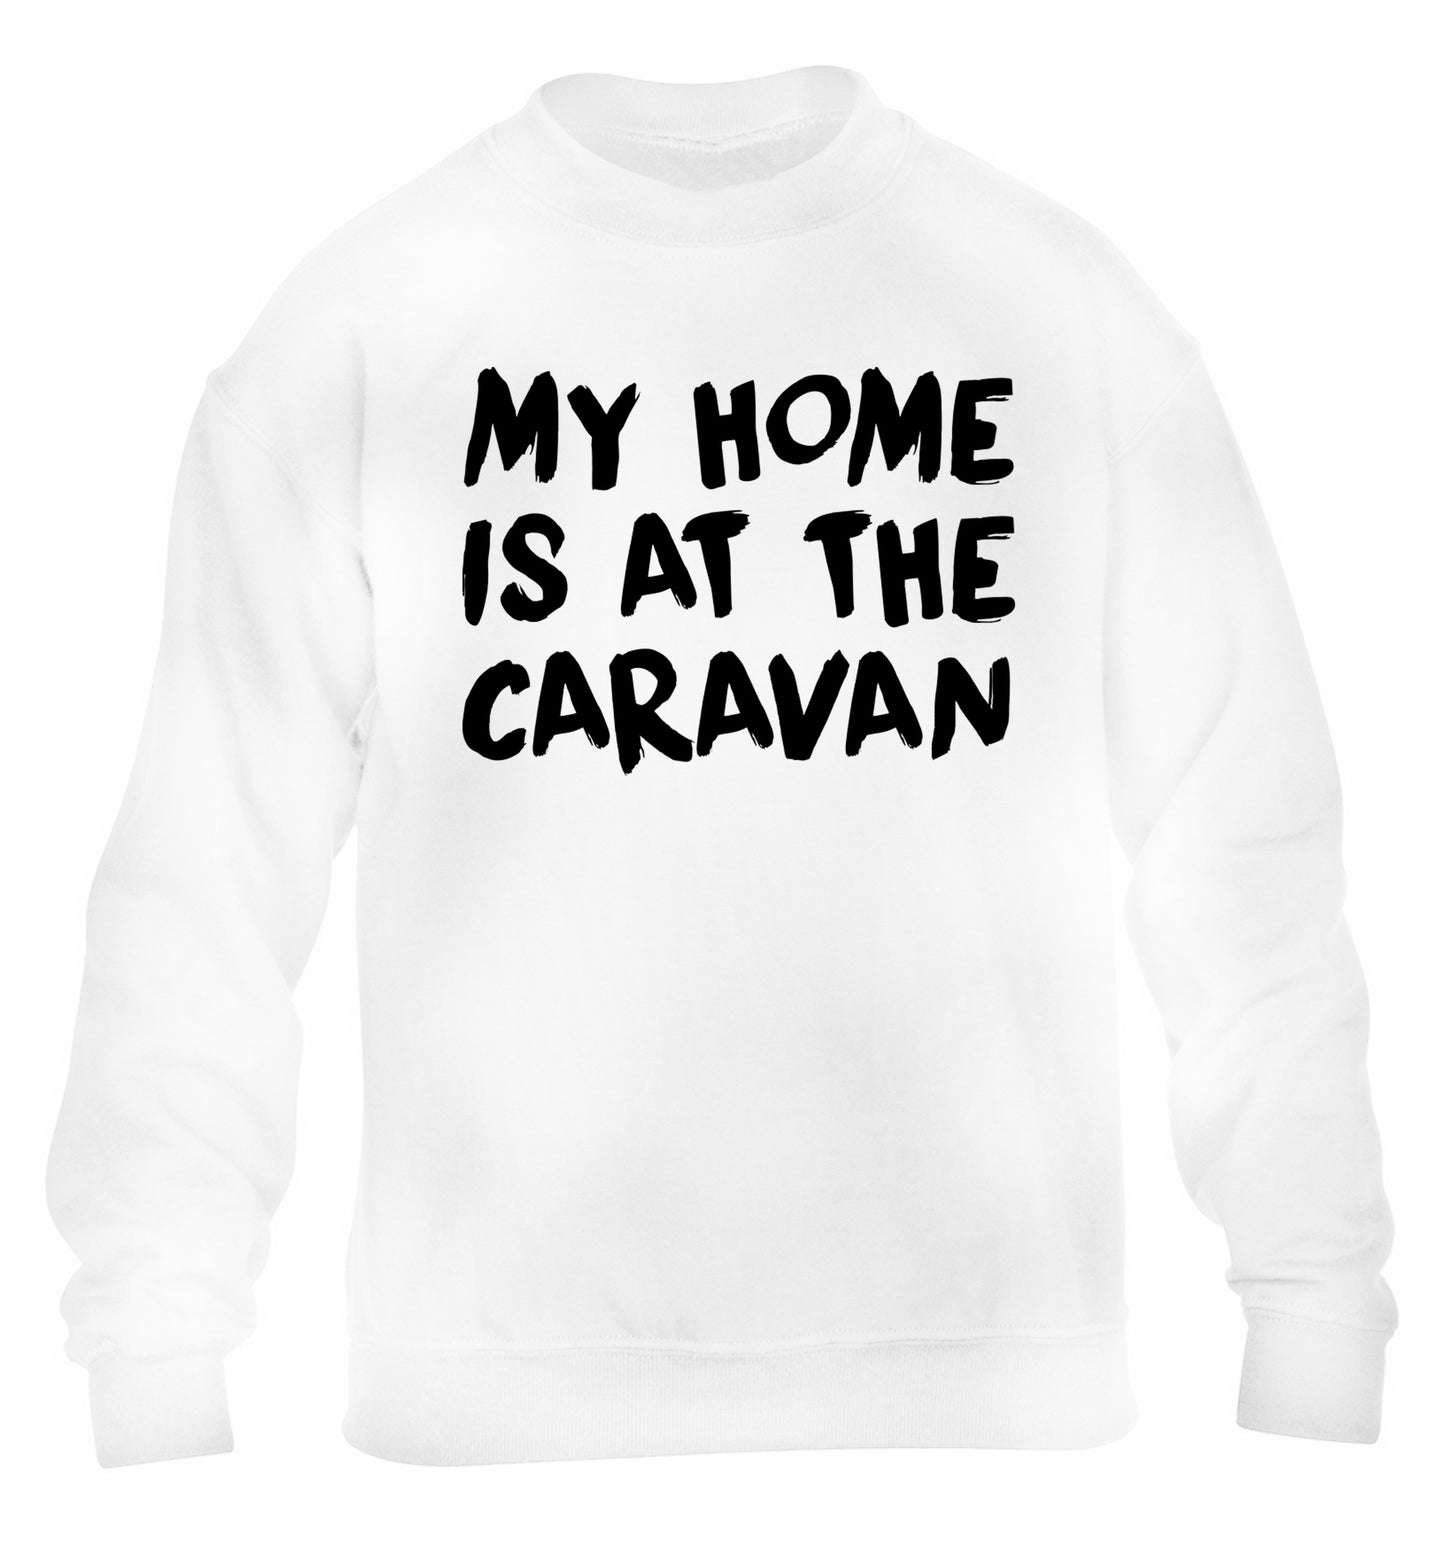 My home is at the caravan children's white sweater 12-14 Years